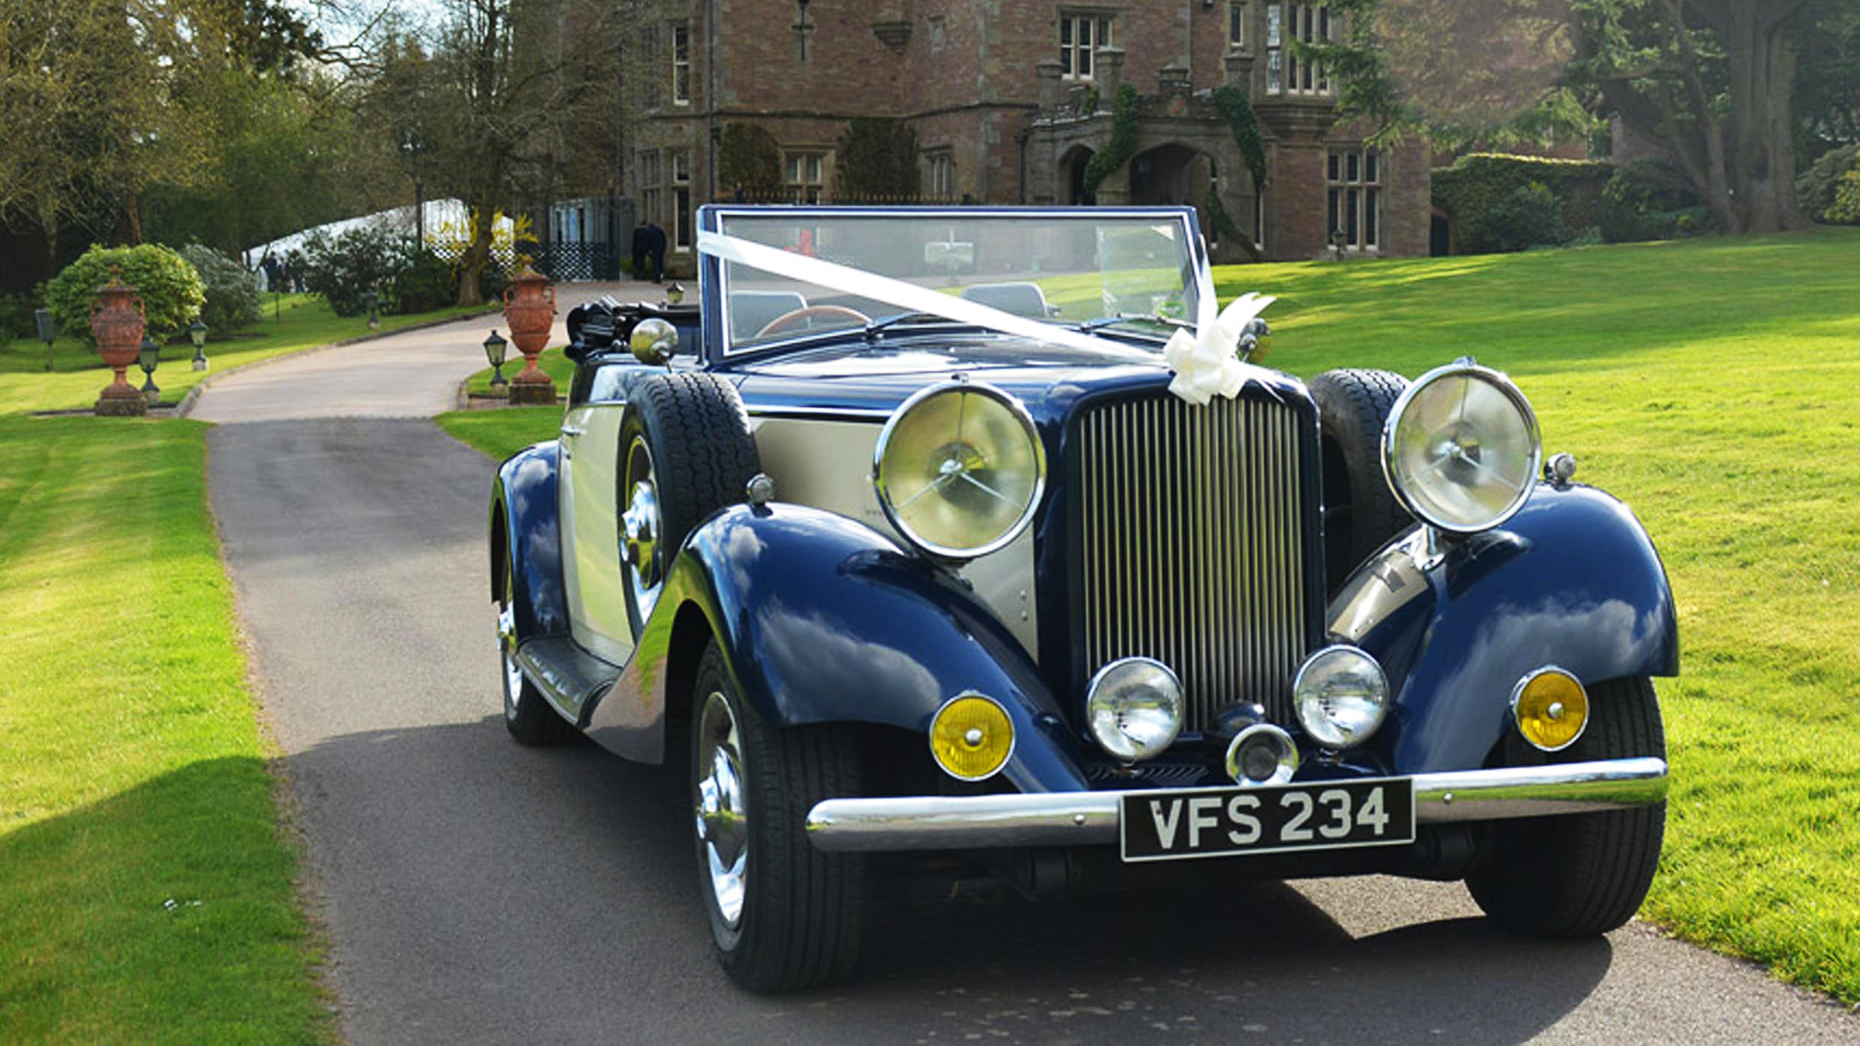 Blue and Ivory vintage Jaguar Drophead on the driveway of a local wedding venue inBroughton Astley.